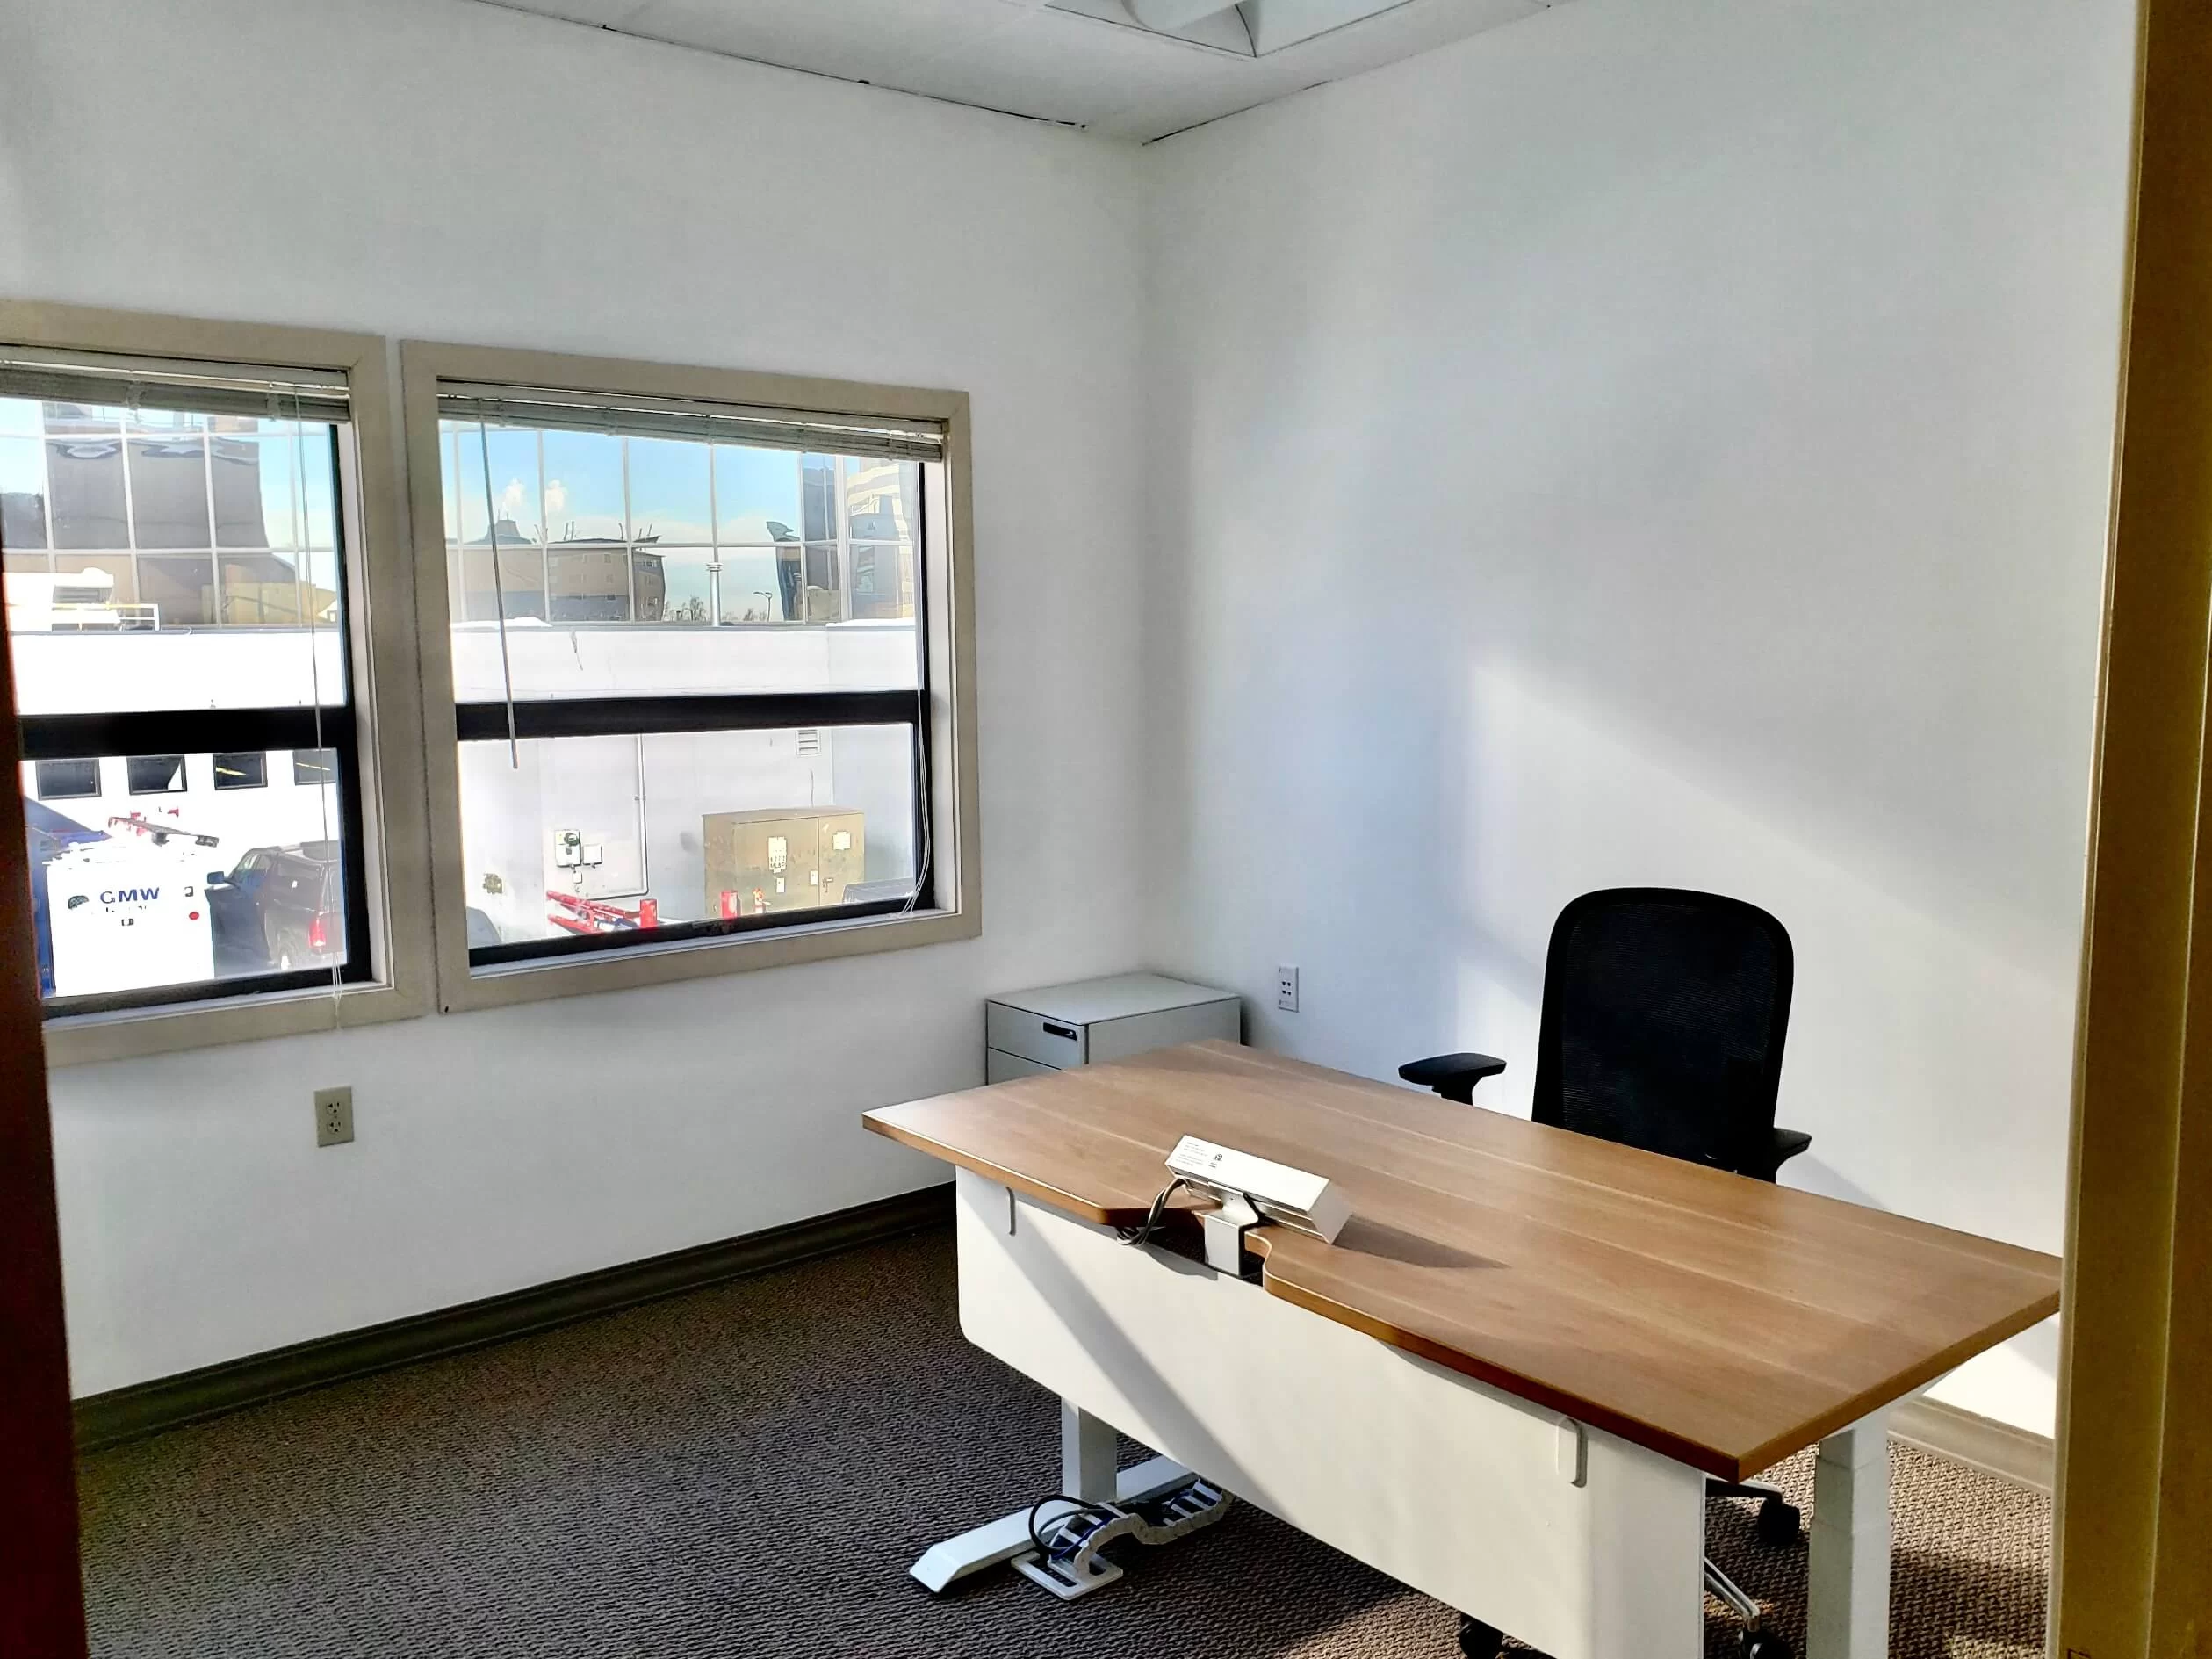 A coworking office at RSD Properties' Cowork by RSD 921 Annex with windows on the left showing a beautiful Anchorage, Alaska day, and a small desk with chair and filing cabinet on the right